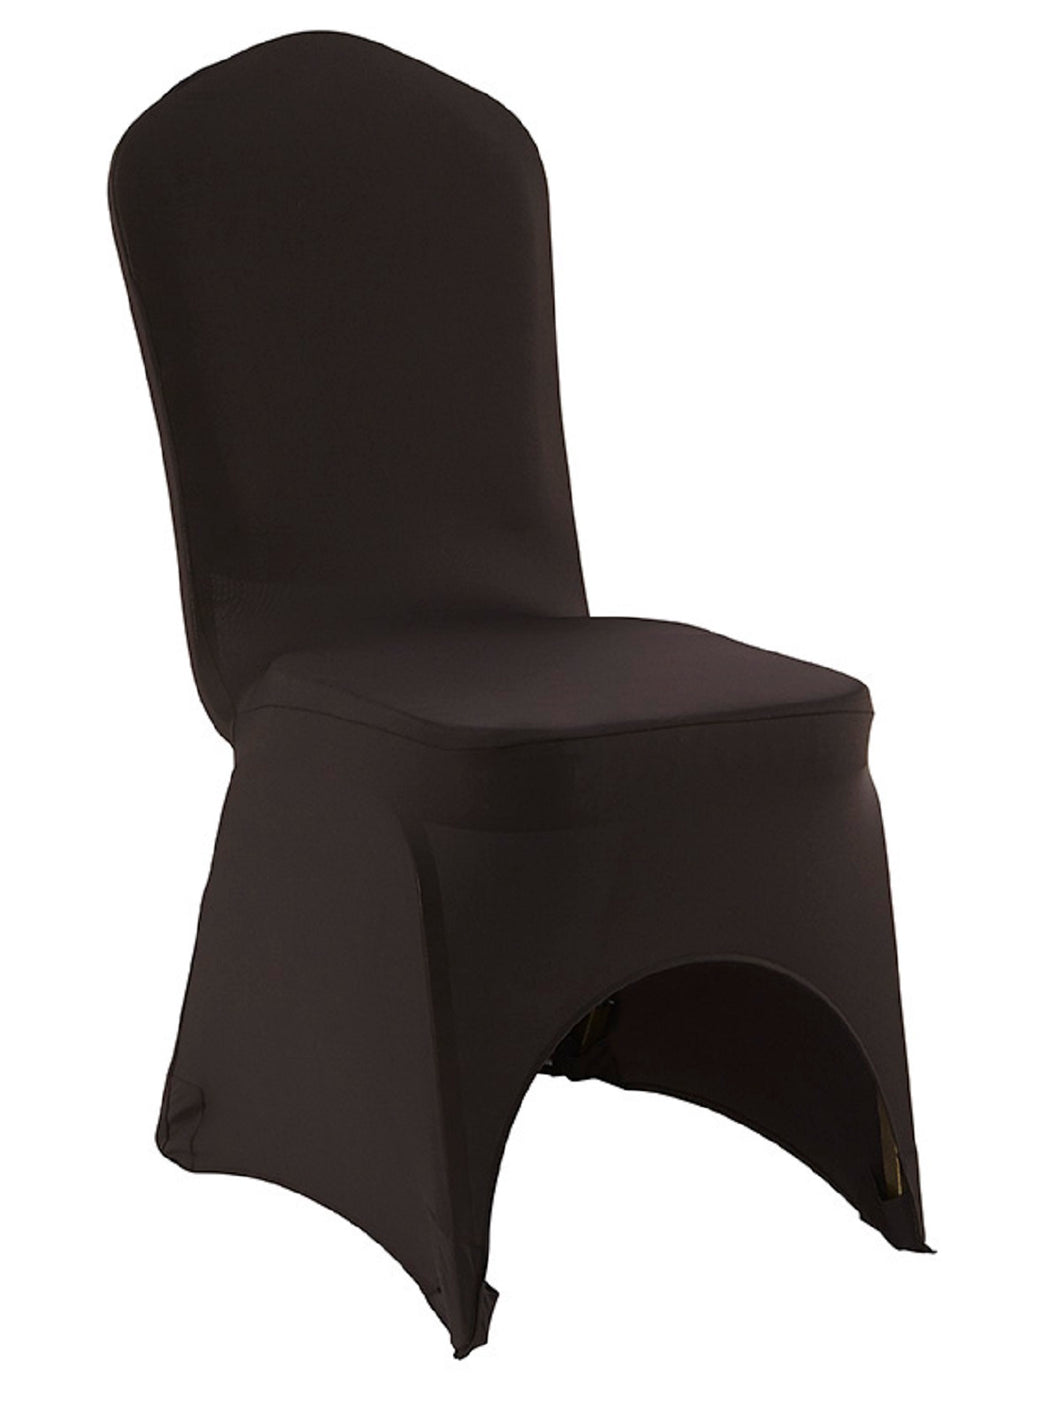 iGear™ Stretch Fabric Banquet Chair Cover, Black